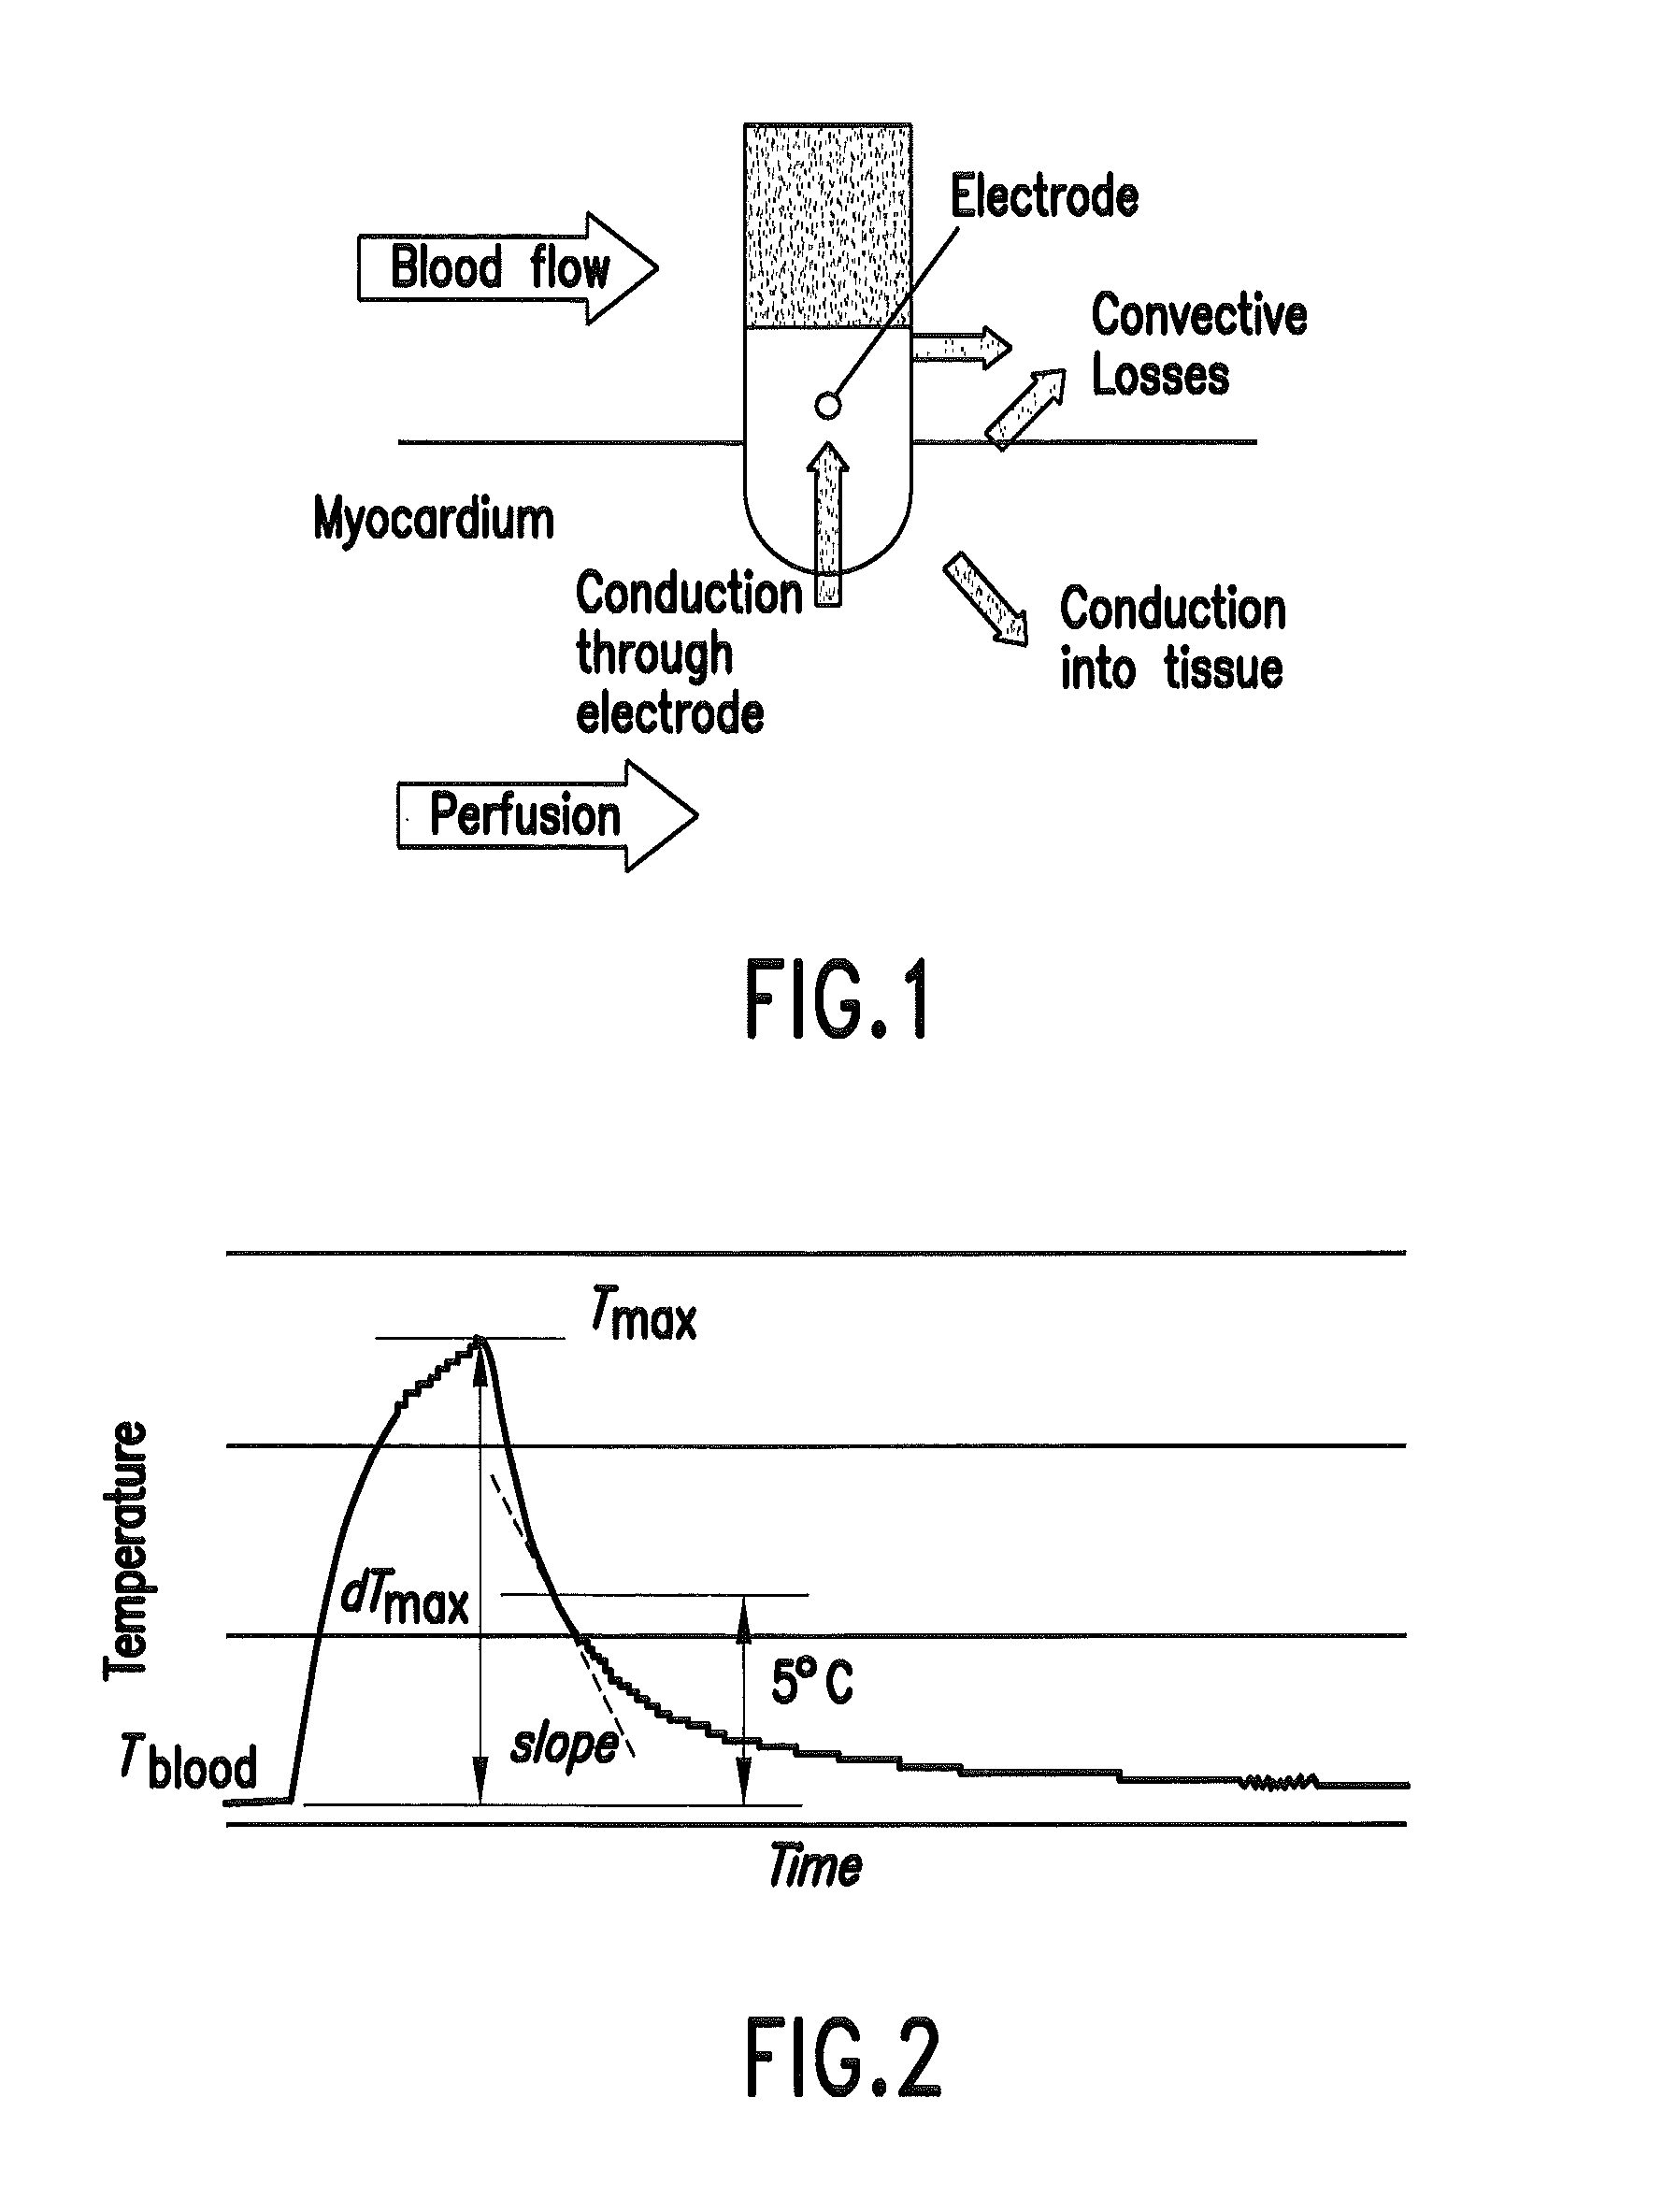 Method and devices for cardiac radiofrequency catheter ablation